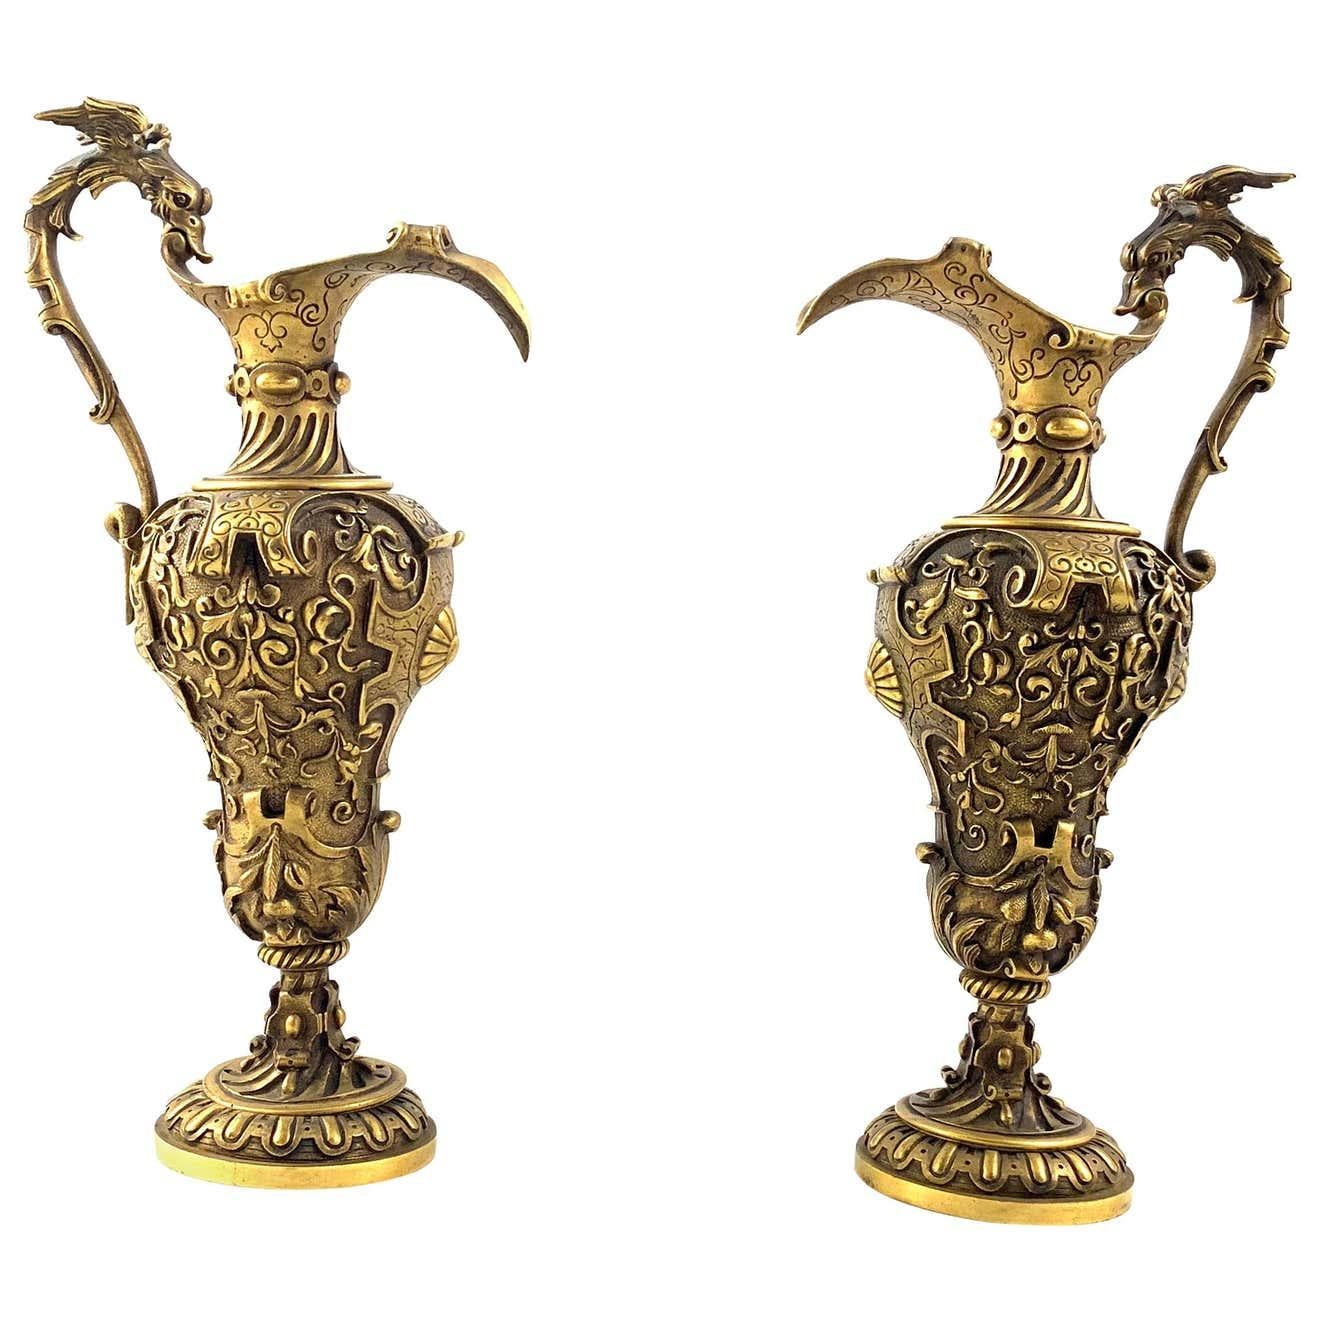 An impressive pair of Renaissance Revival cast gilt bronze ewers. Italian circa 1900. Each decorated with formal foliate decoration and heavy scroll work. With long ornate handle and short knopped stem with stepped circular base.